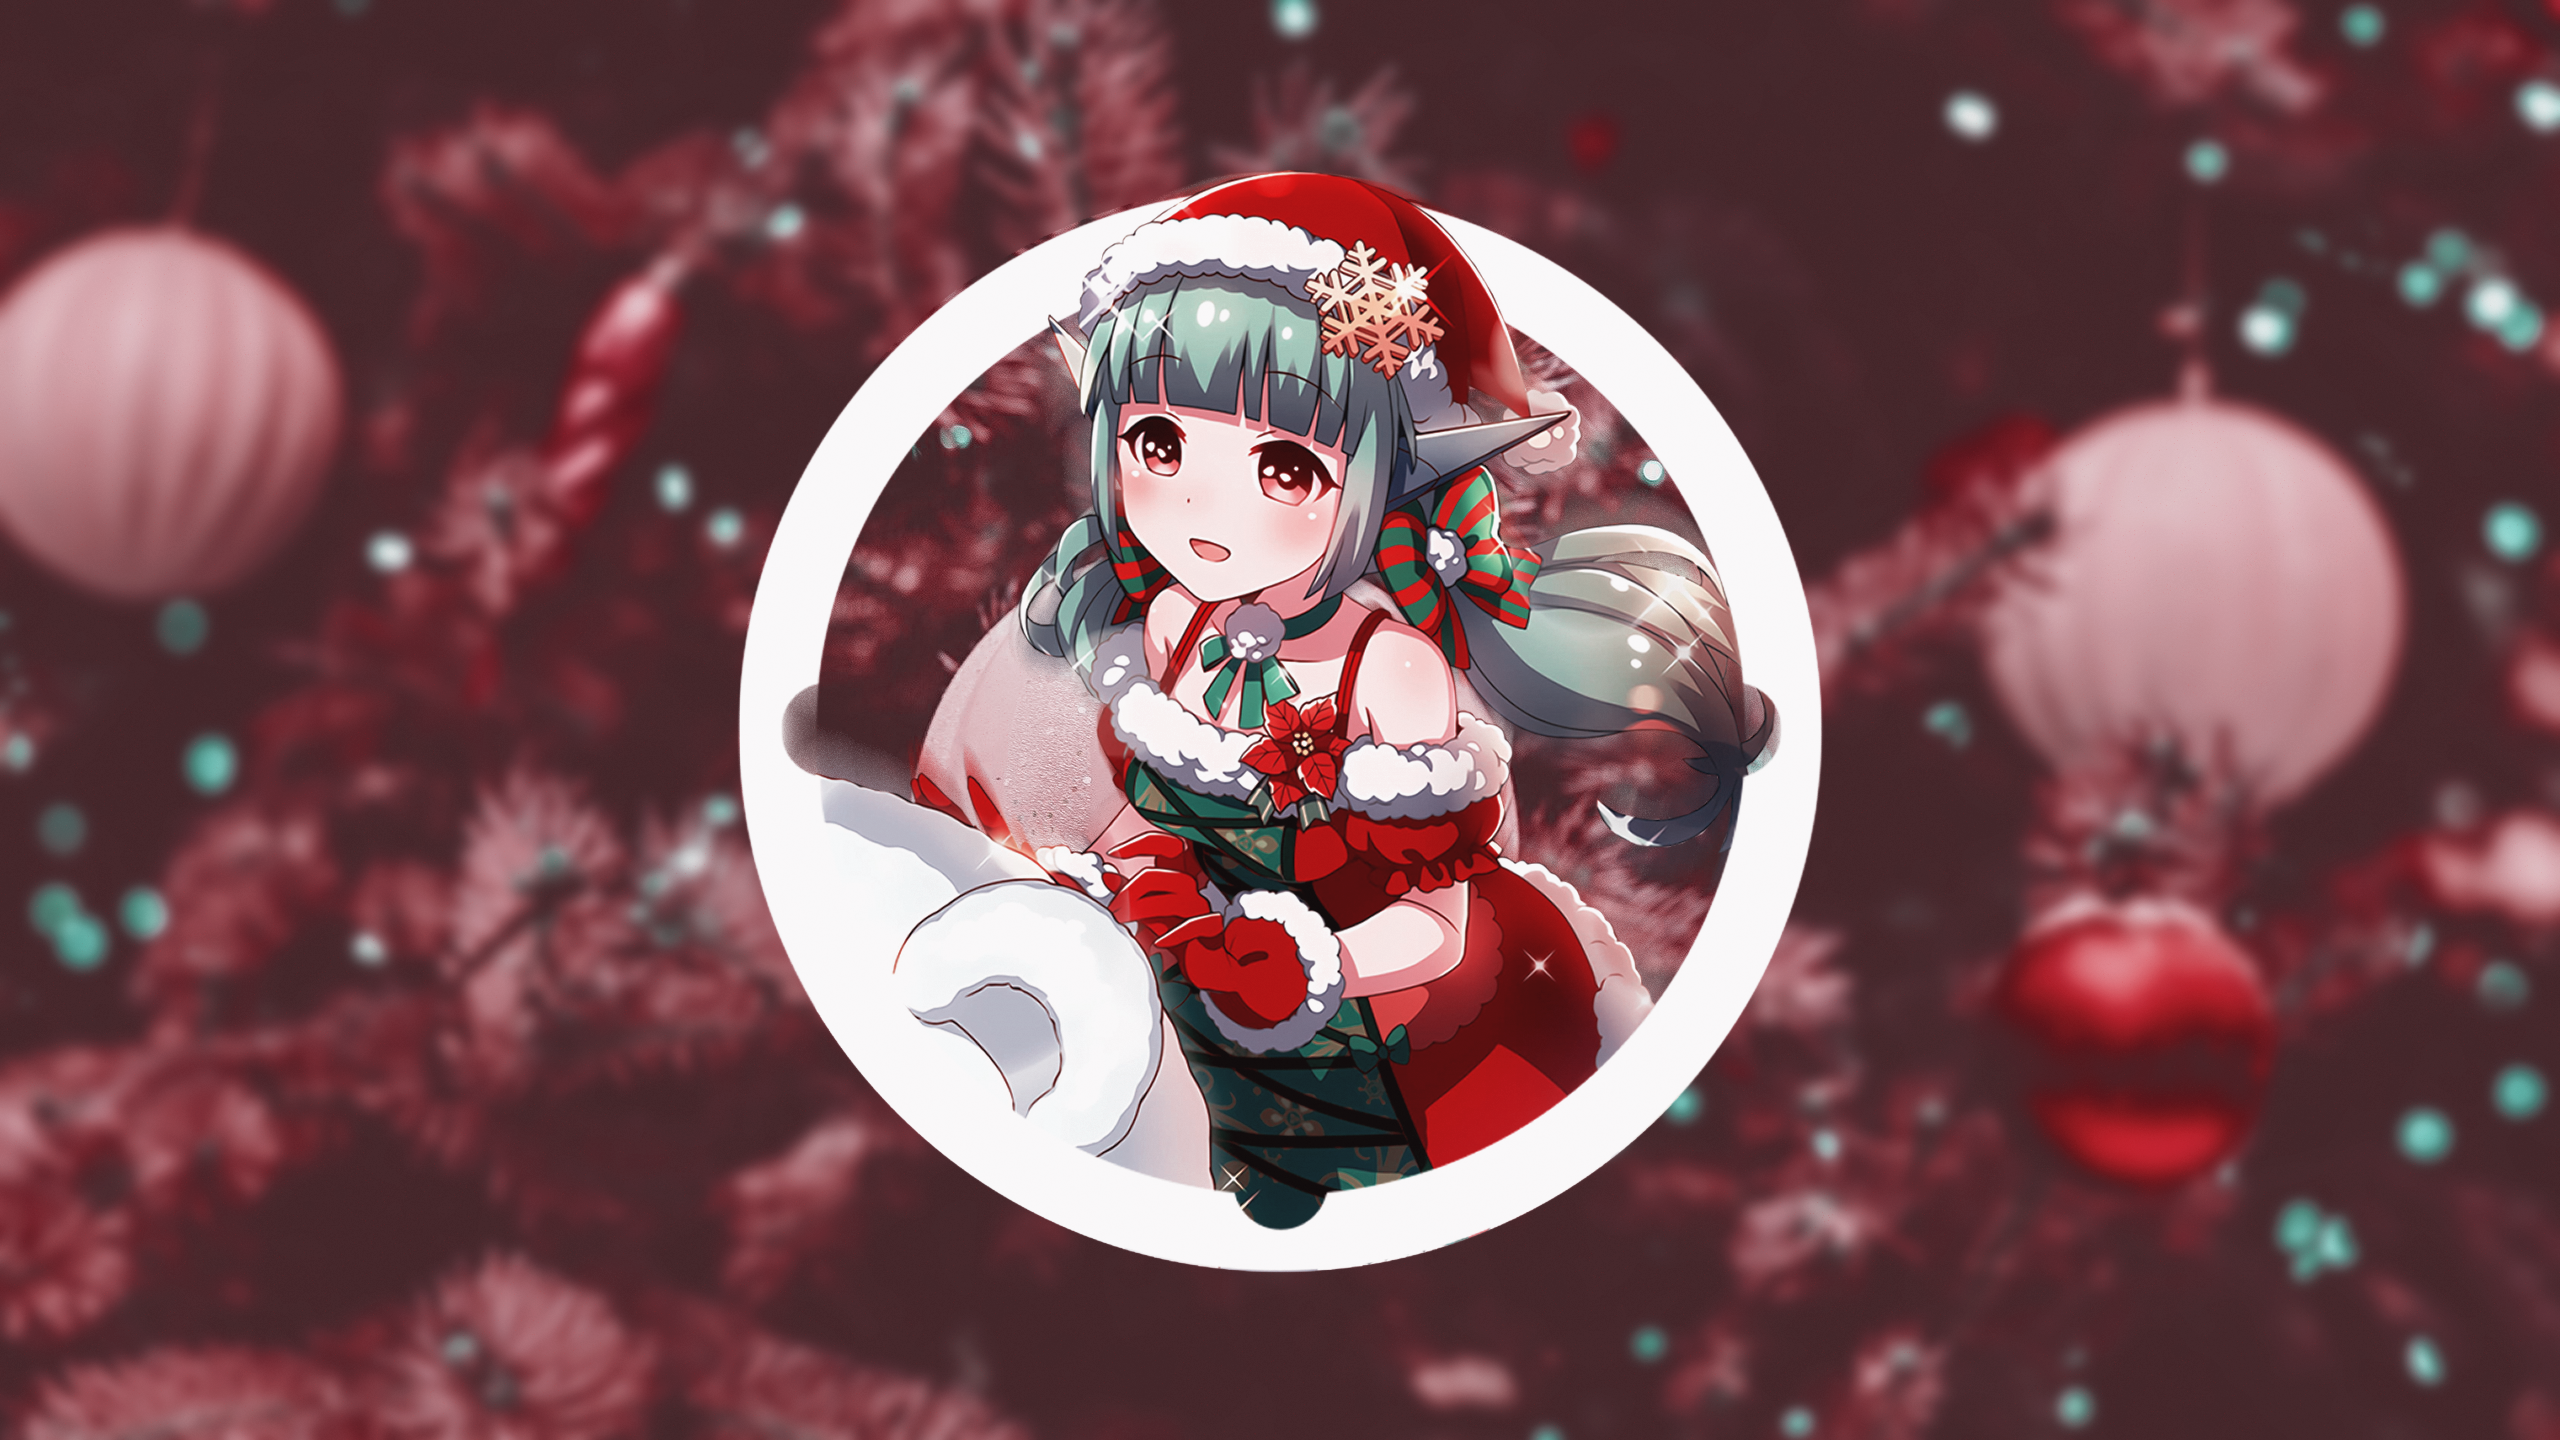 Anime 2560x1440 Christmas anime girls Santa girl picture-in-picture